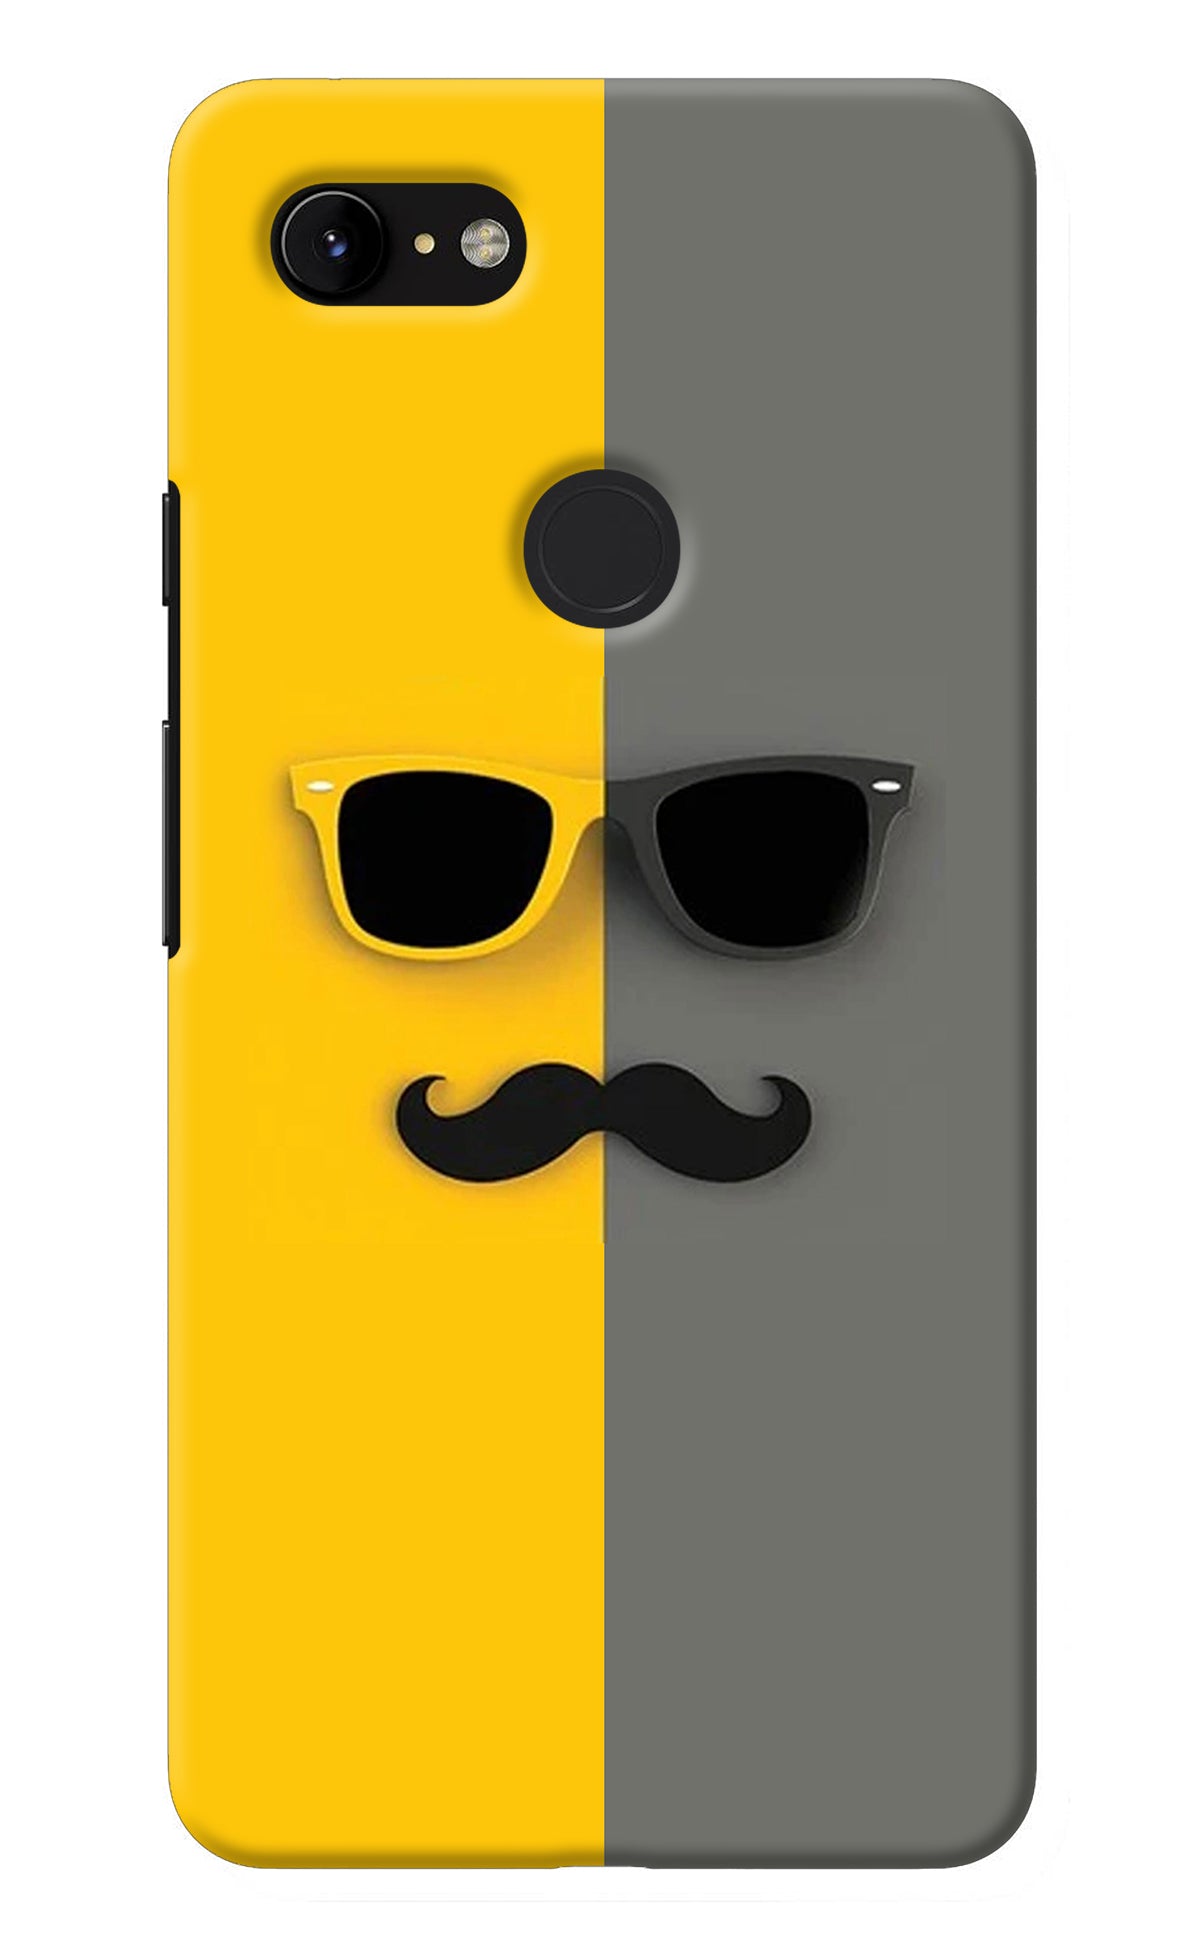 Sunglasses with Mustache Google Pixel 3 XL Back Cover